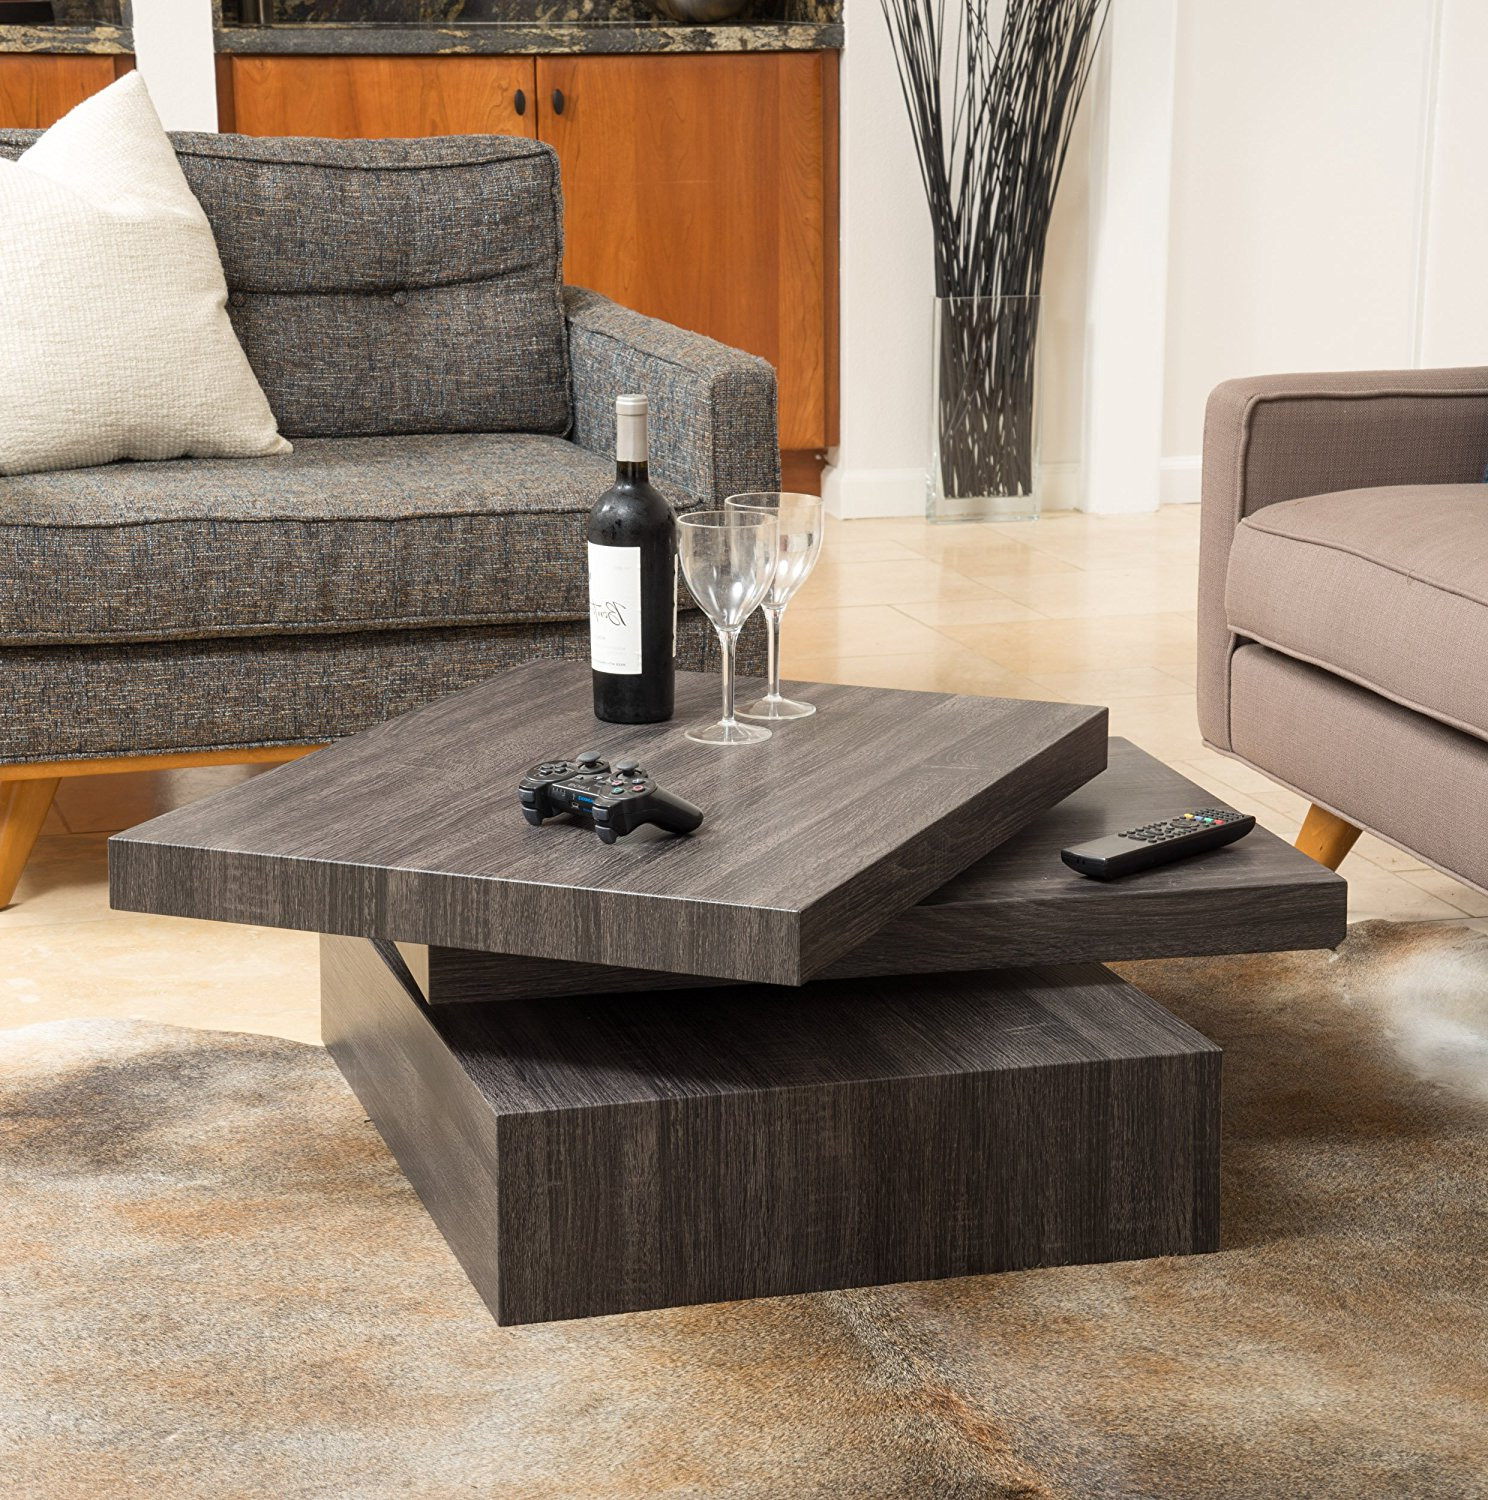 Living Room Coffee Table
 Coffee Tables Under $200 for Modern Living Room Focal